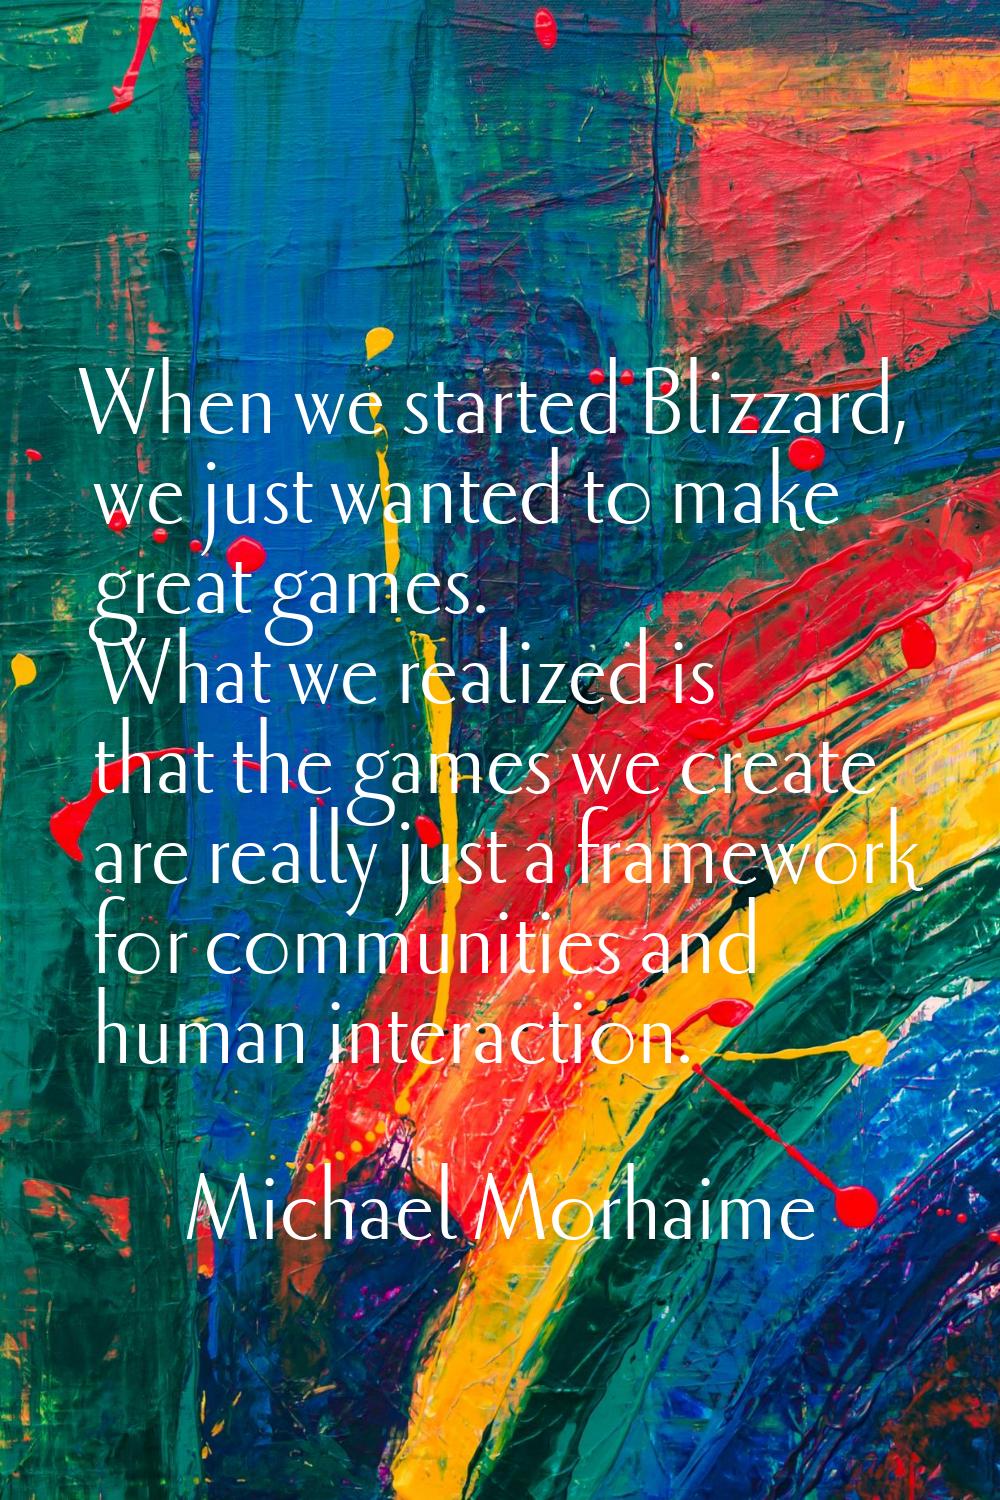 When we started Blizzard, we just wanted to make great games. What we realized is that the games we